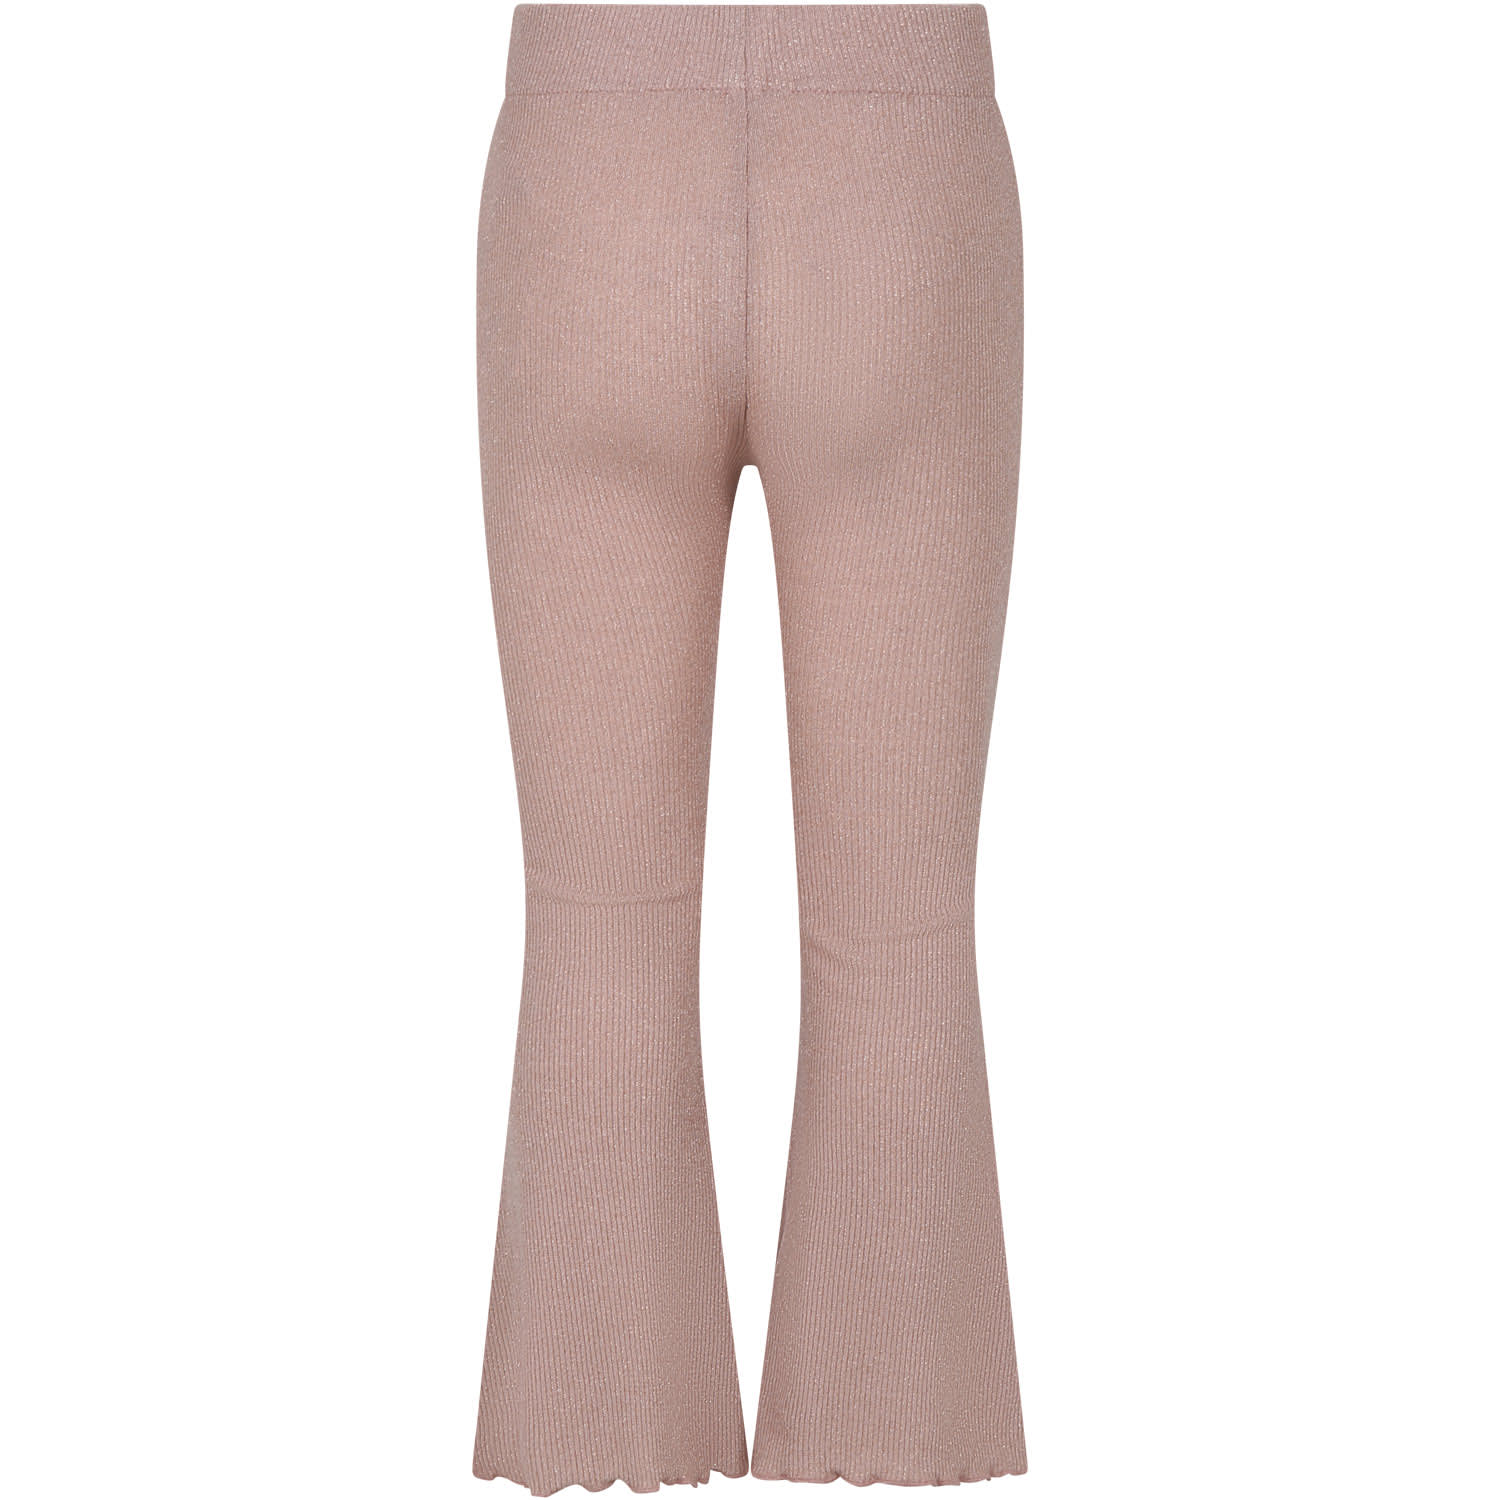 Shop Caffe' D'orzo Pink Trousers For Girl With Lurex